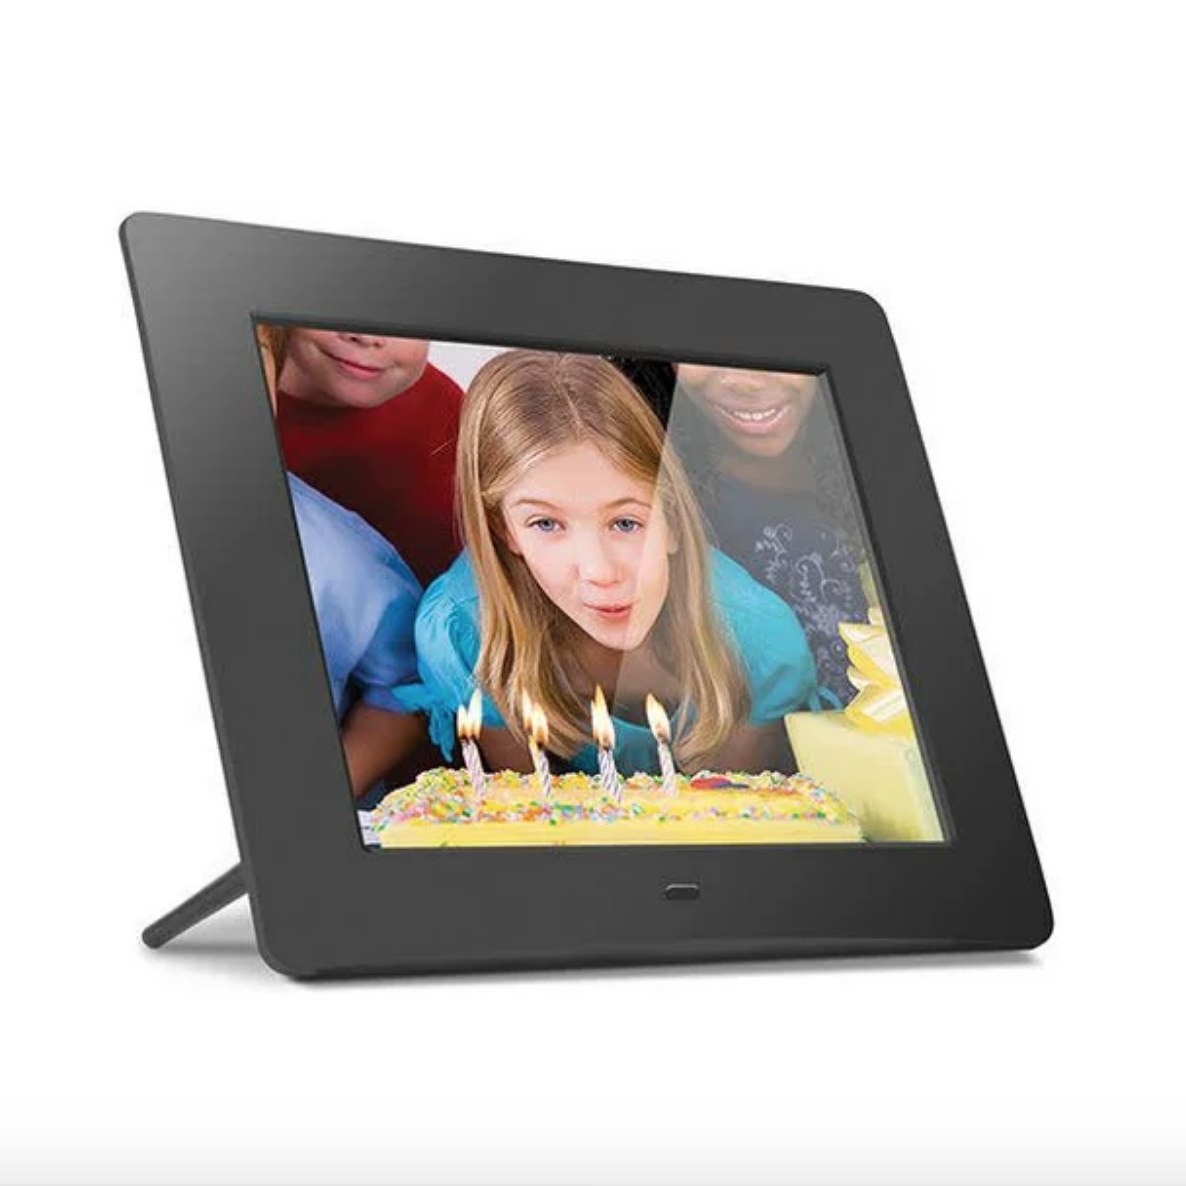 Black digital frame with photo of child blowing out candles on a birthday cake